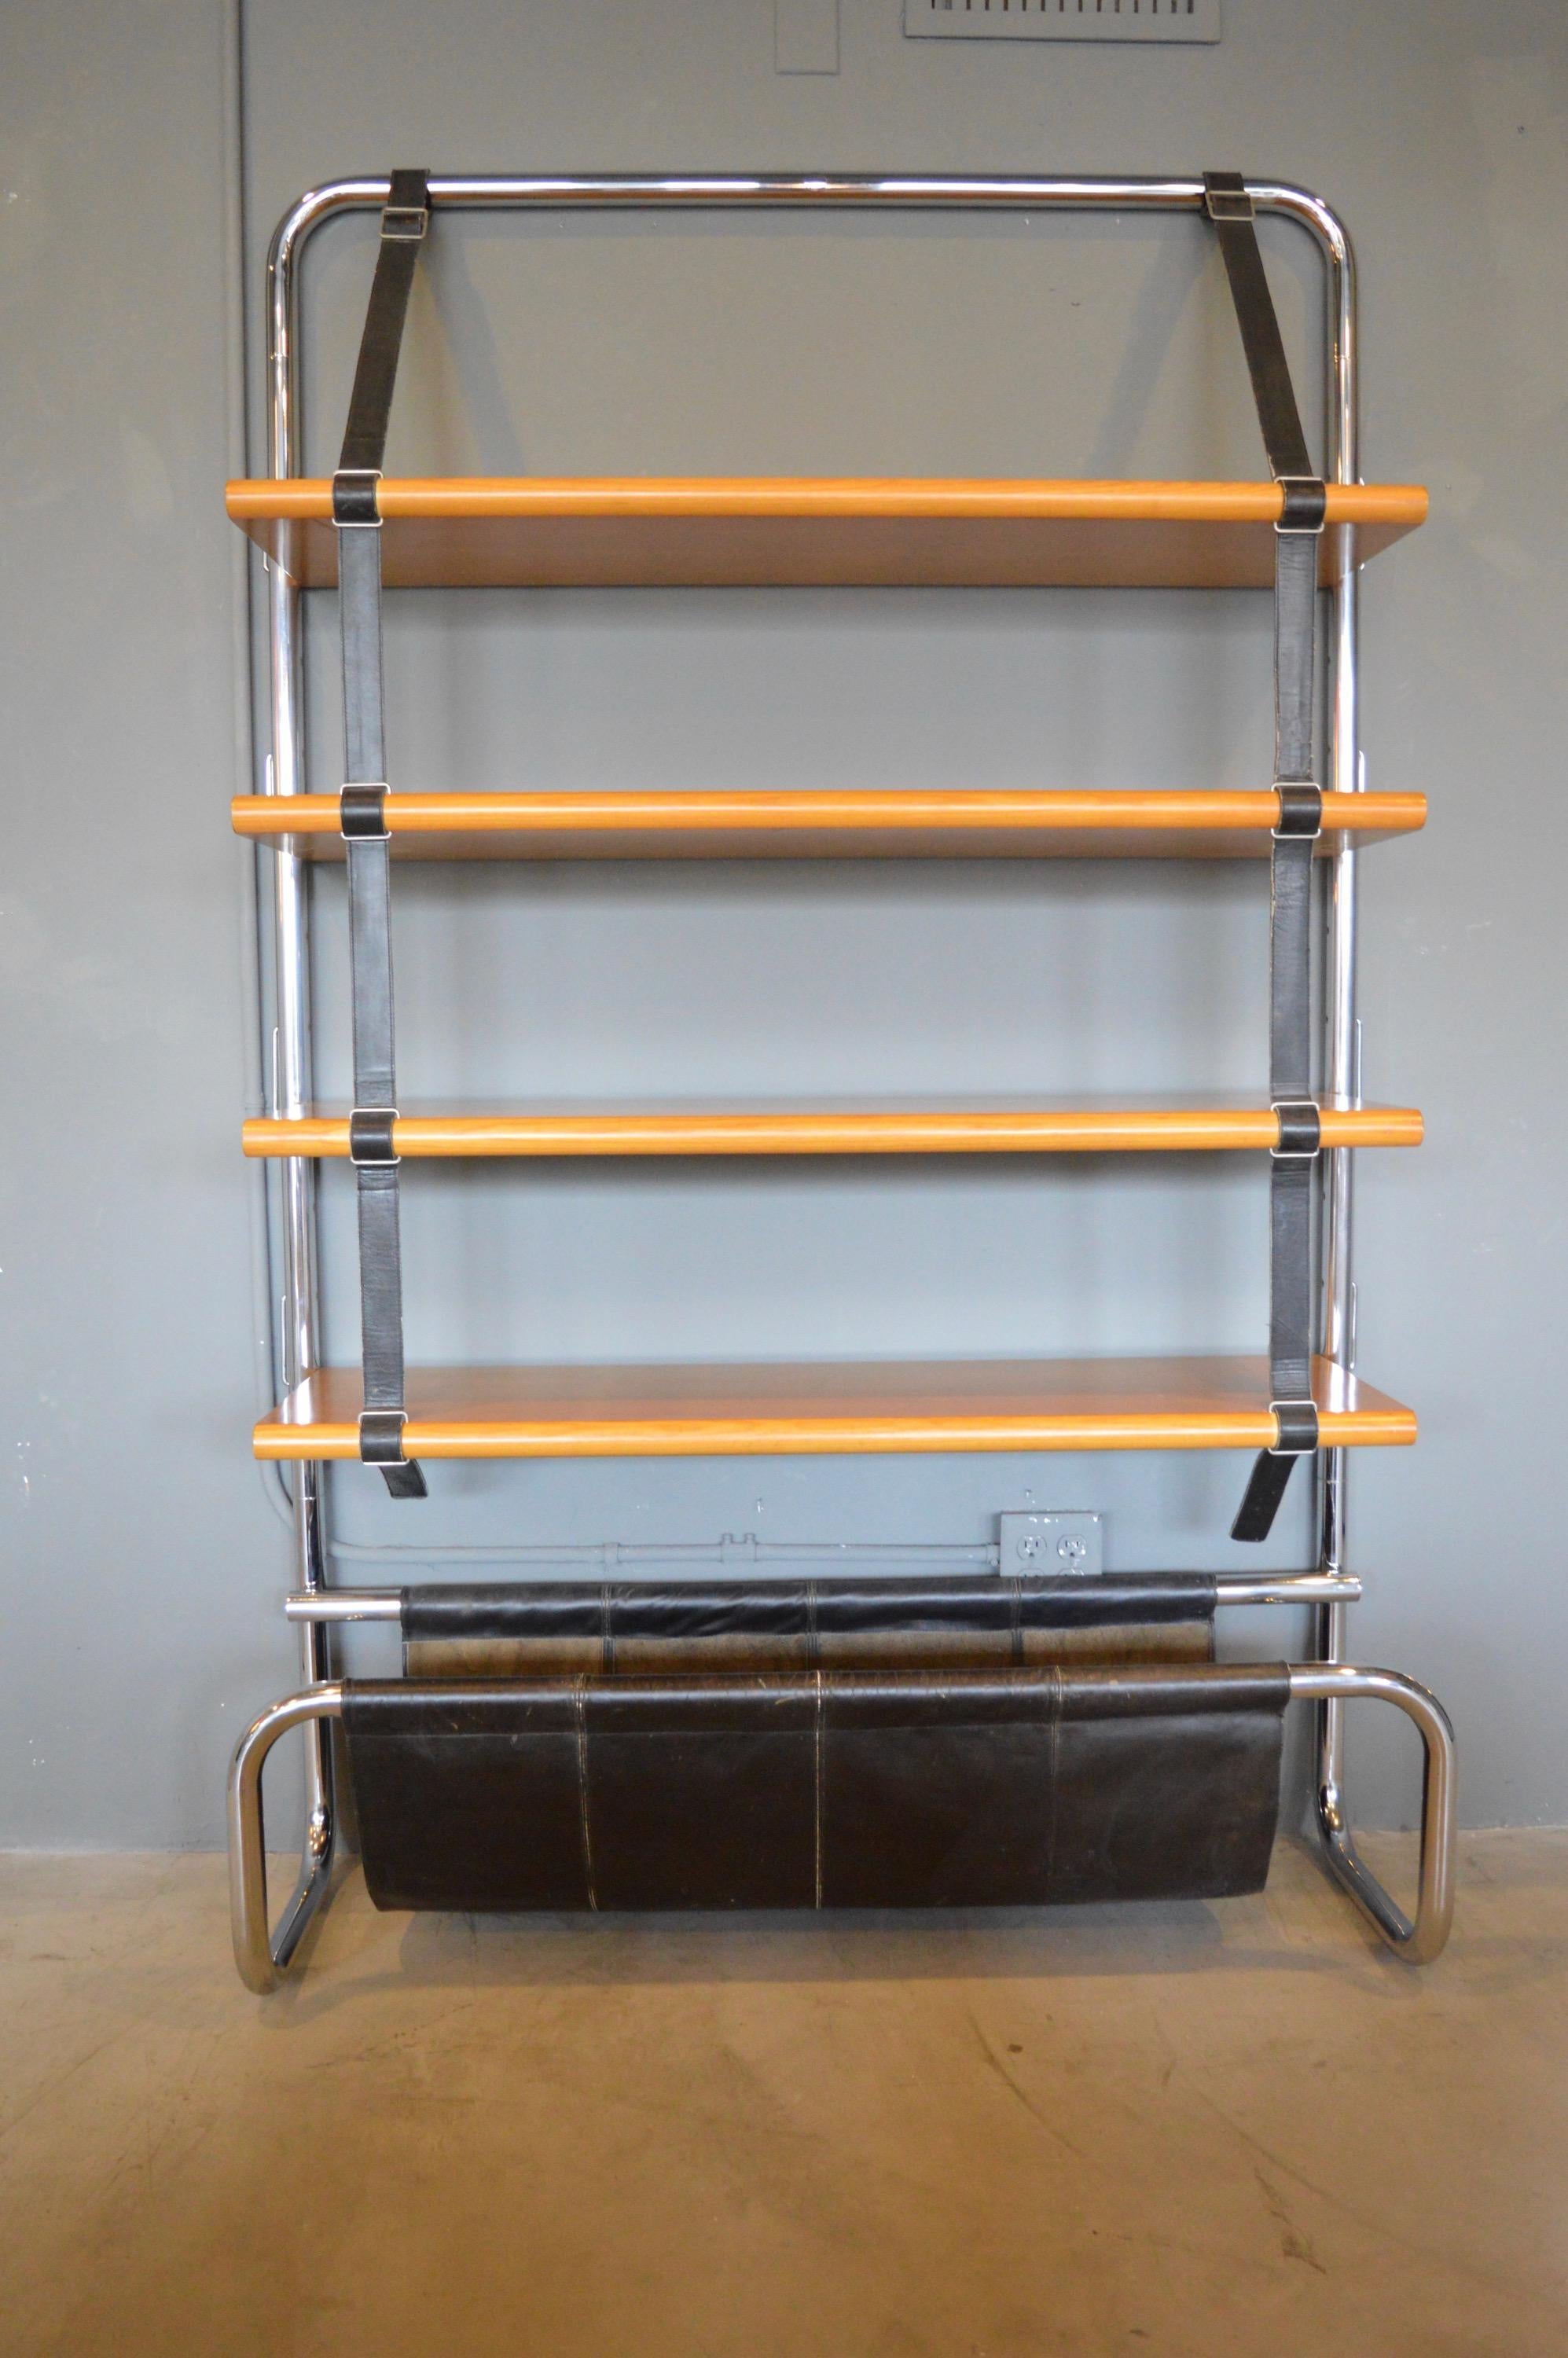 Stunning chrome, leather and wood bookshelf by Luigi Massoni for Poltrona Frau. Made in 1971, featuring tubular chrome frame, with five oak shelves, black leather straps and leather catchall at the bottom. Shelves are suspended by saddle leather